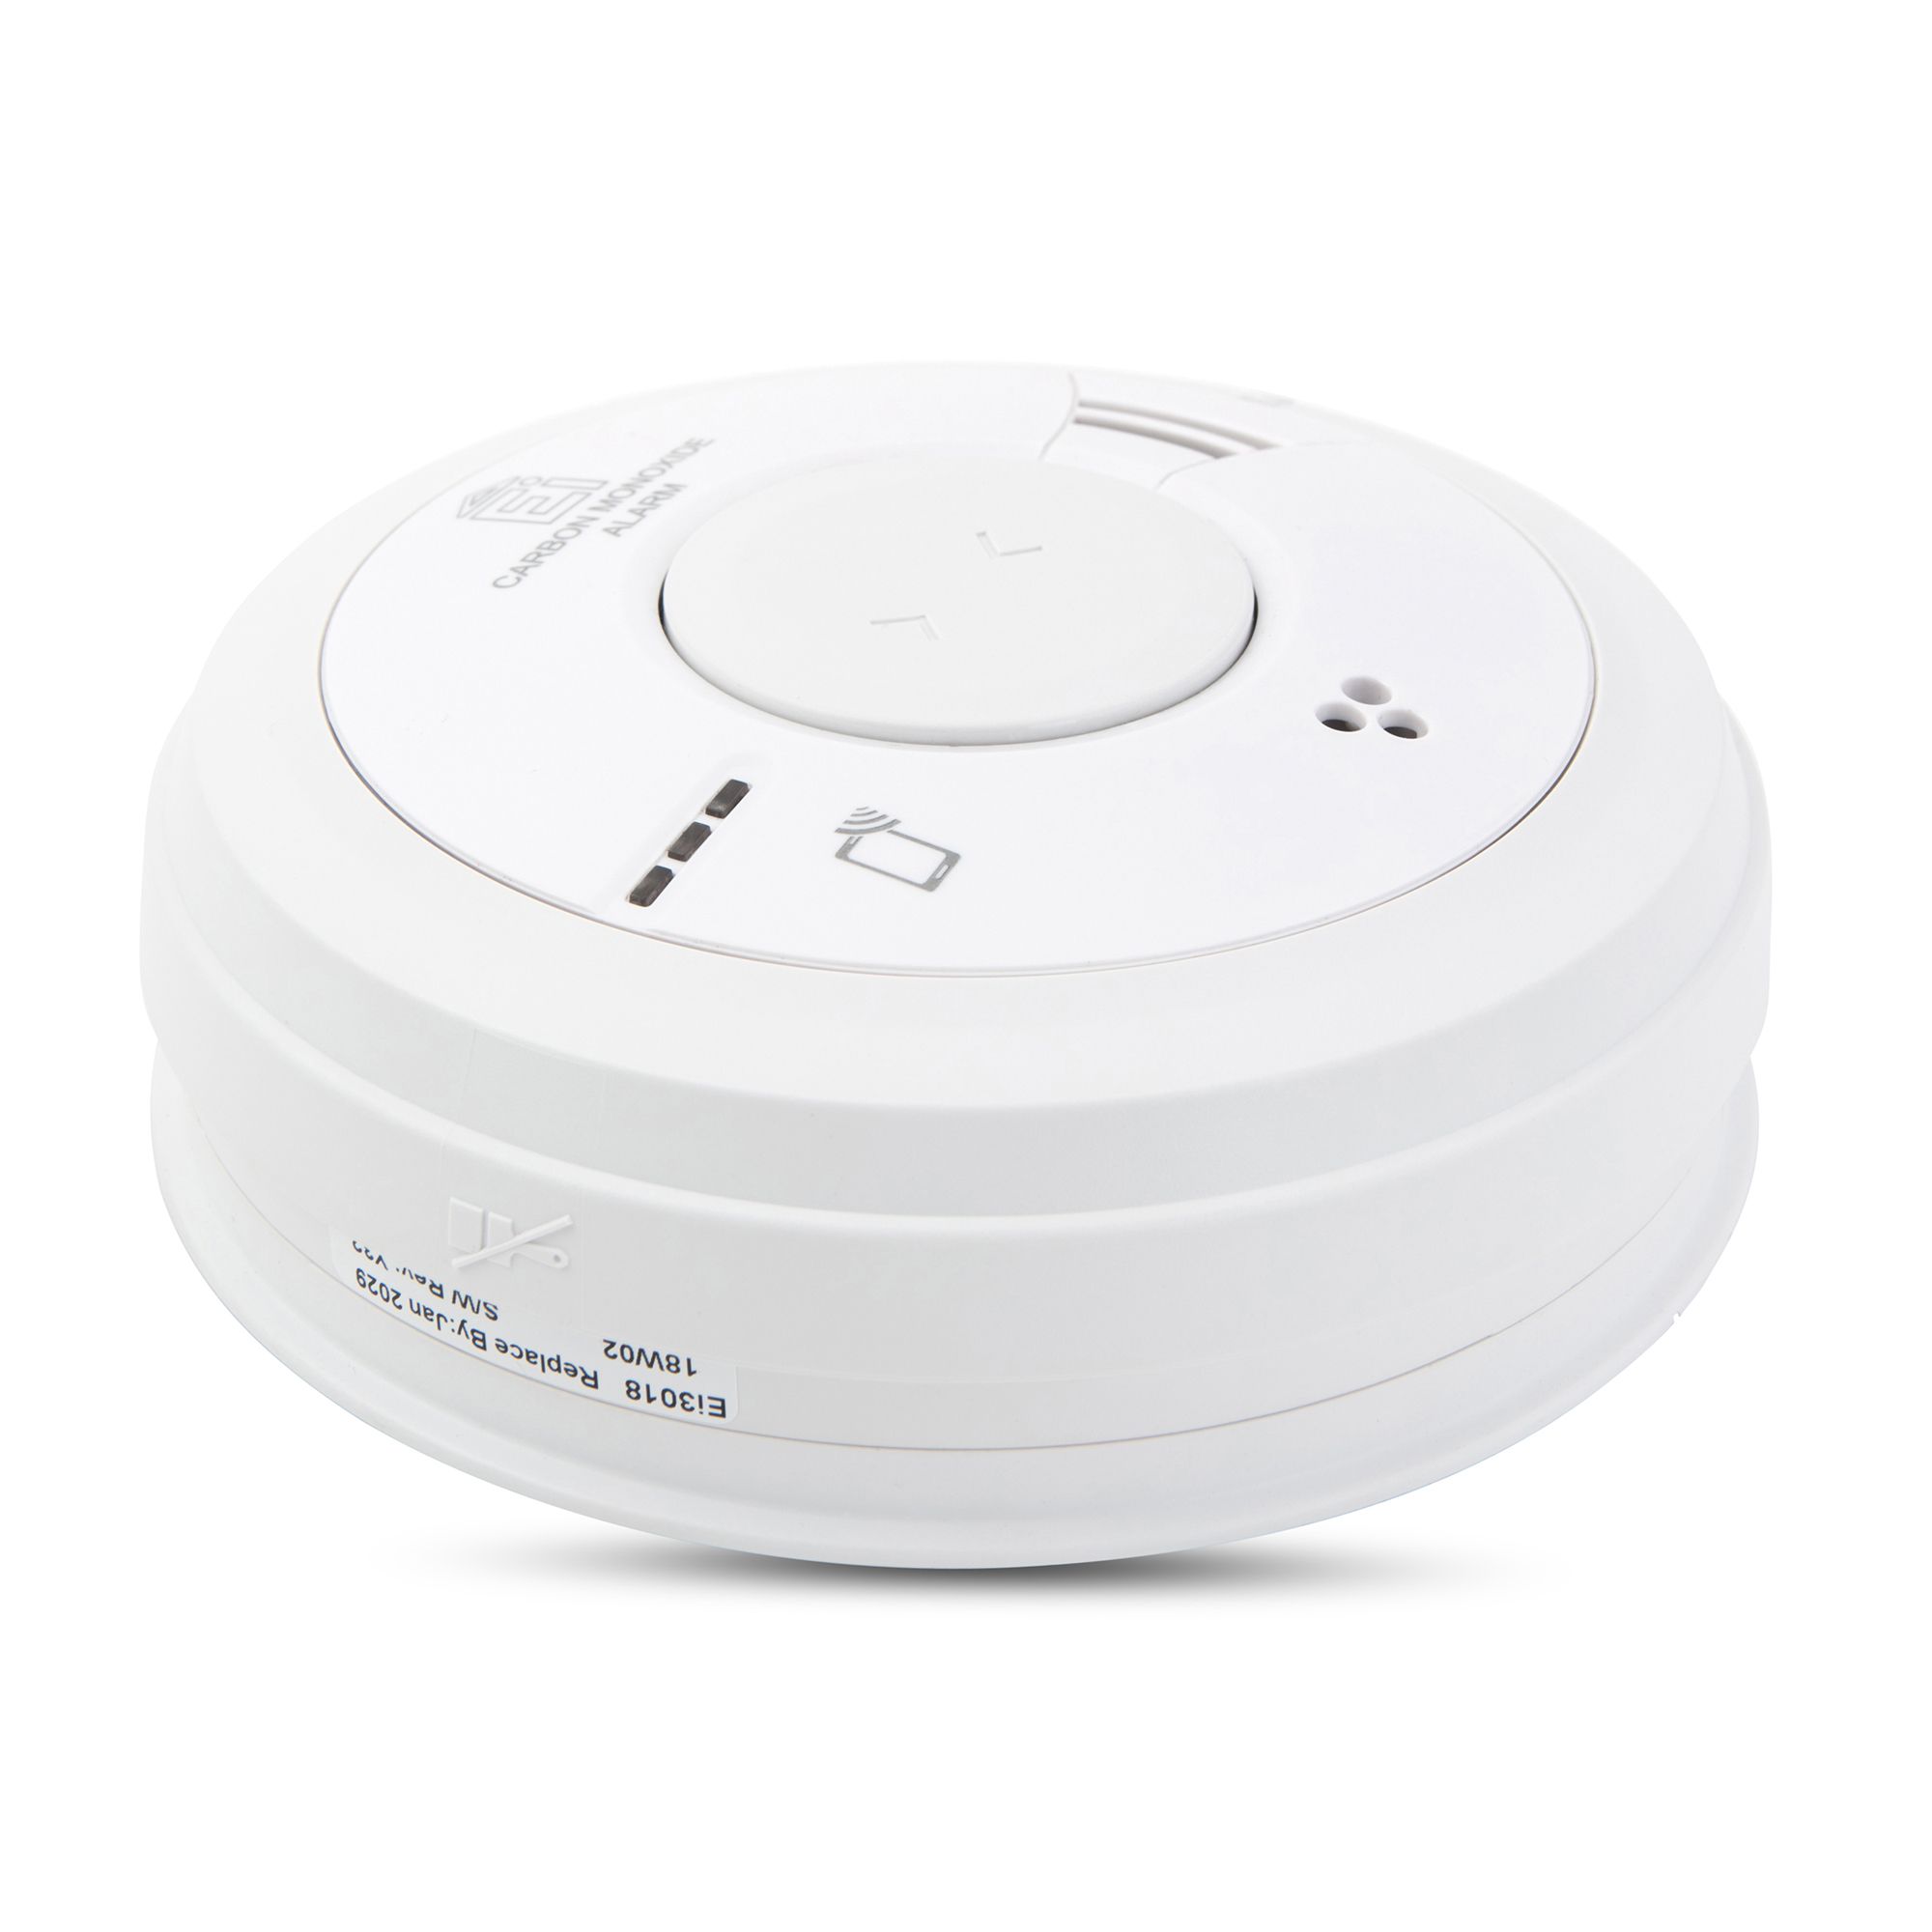 Aico Ei3018 Wired Carbon monoxide Alarm with 10-year sealed battery